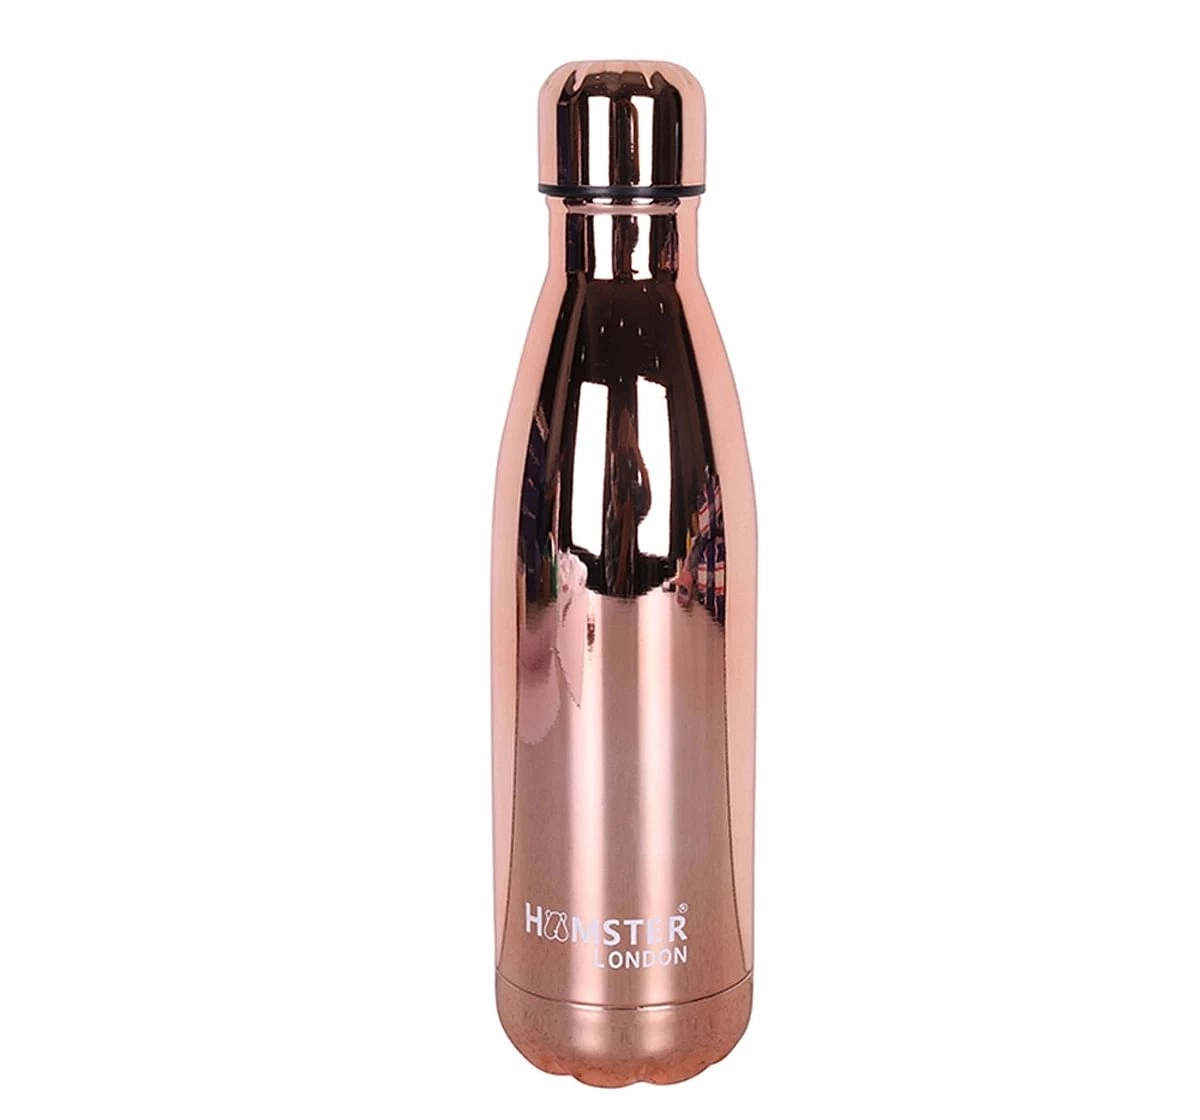 Stainless Steel Insulated Water Bottle by Hamster London for Kids, Rosegold, Non-Toxic, BPA Free, 500ml, 5Y+